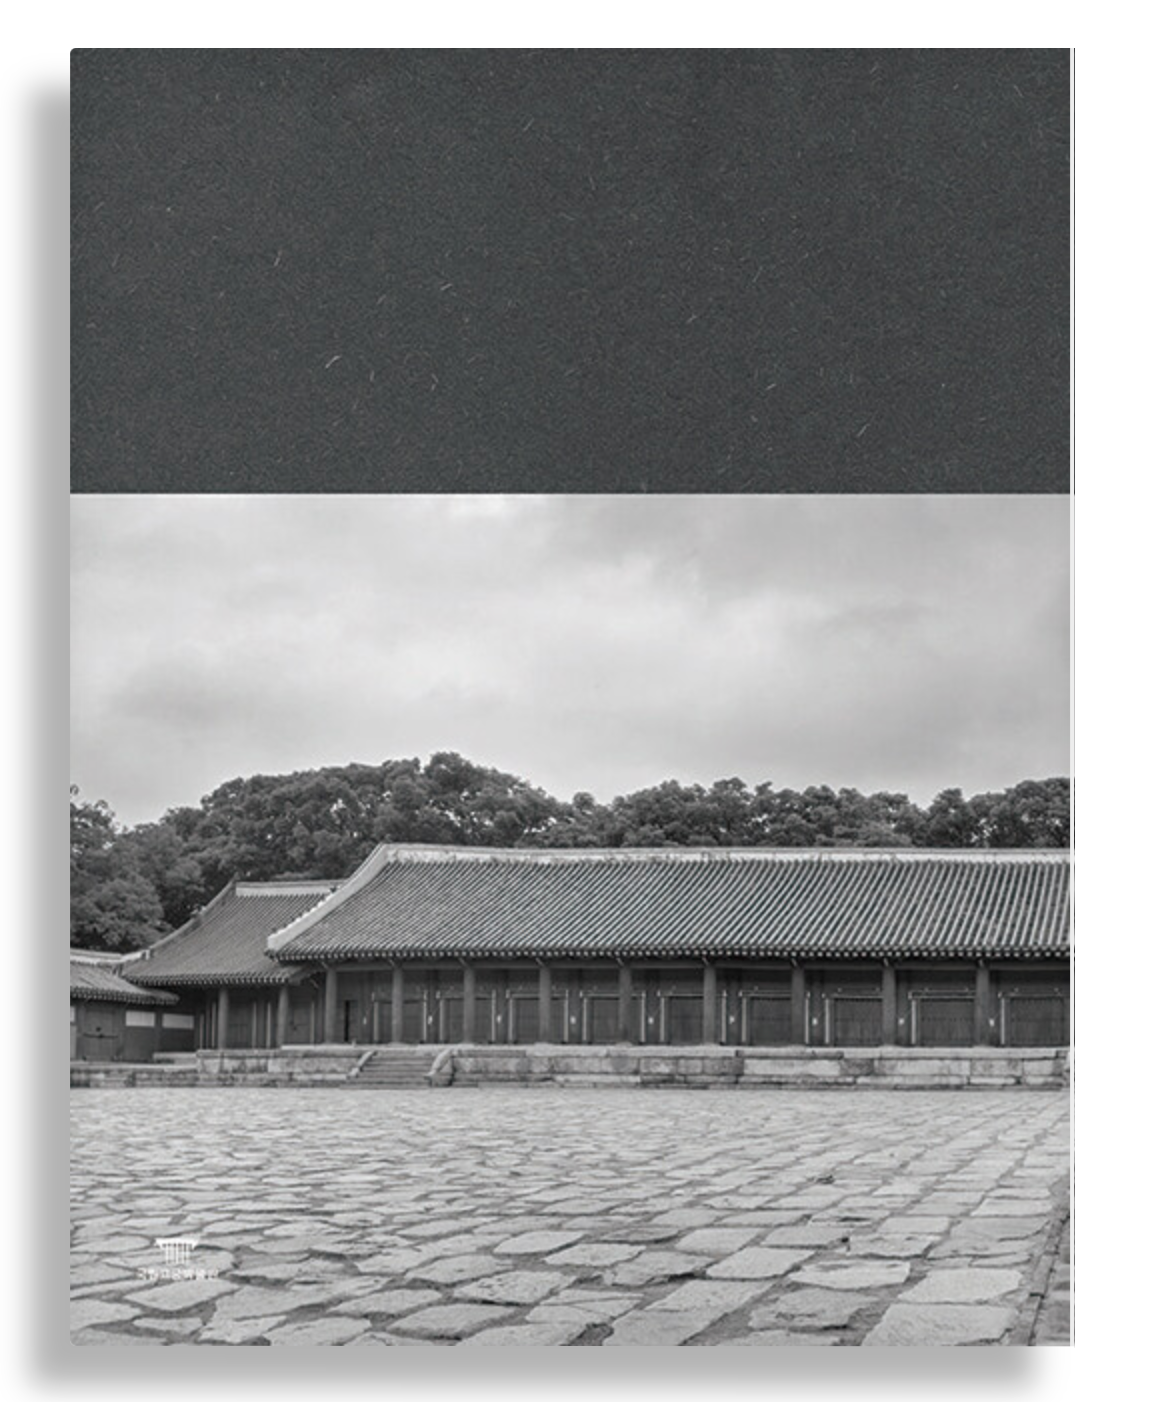 JONGMYO. THE ROYAL ANCESTRAL SHRINE - Special Exhibition Catalog of the National Palace Museum of Korea